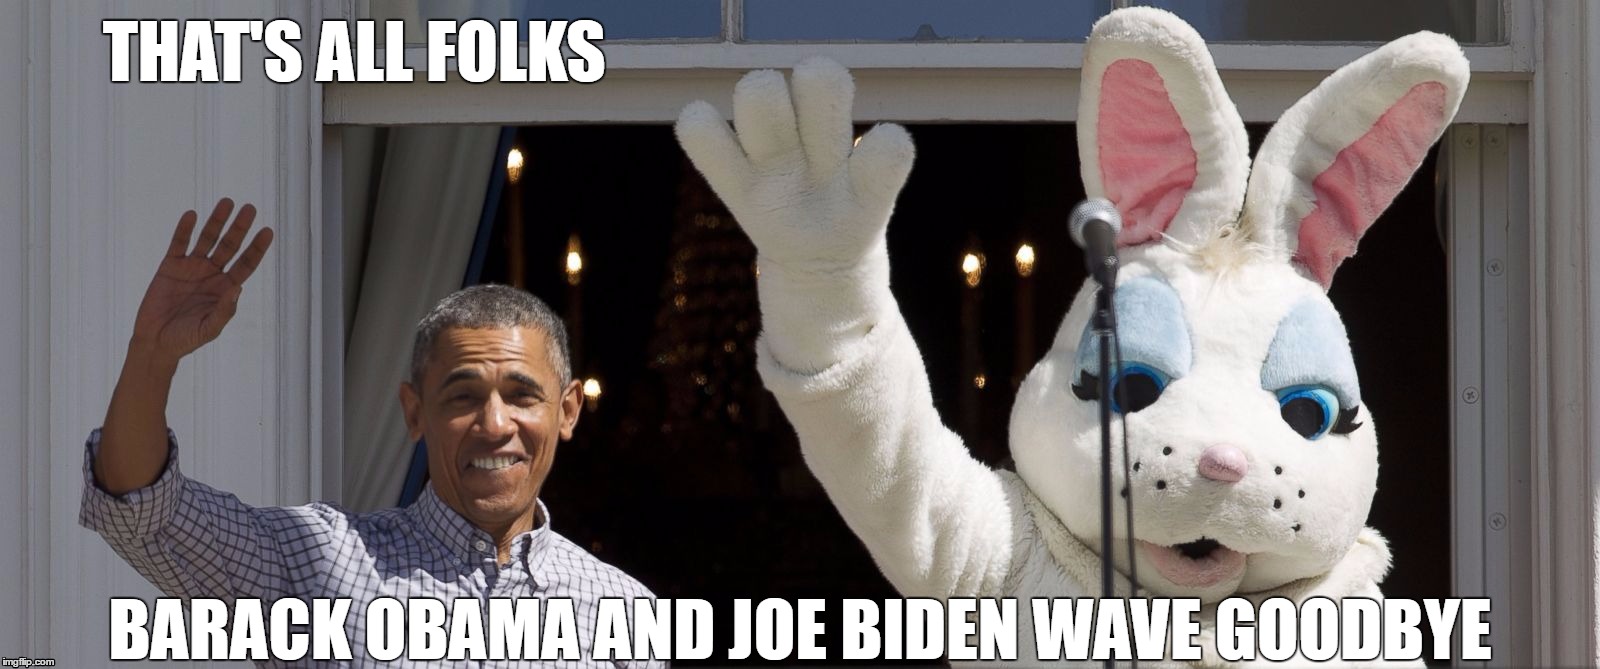 That's All Folks! | THAT'S ALL FOLKS; BARACK OBAMA AND JOE BIDEN WAVE GOODBYE | image tagged in funny,barack obama,joe biden,bunny,funny memes | made w/ Imgflip meme maker